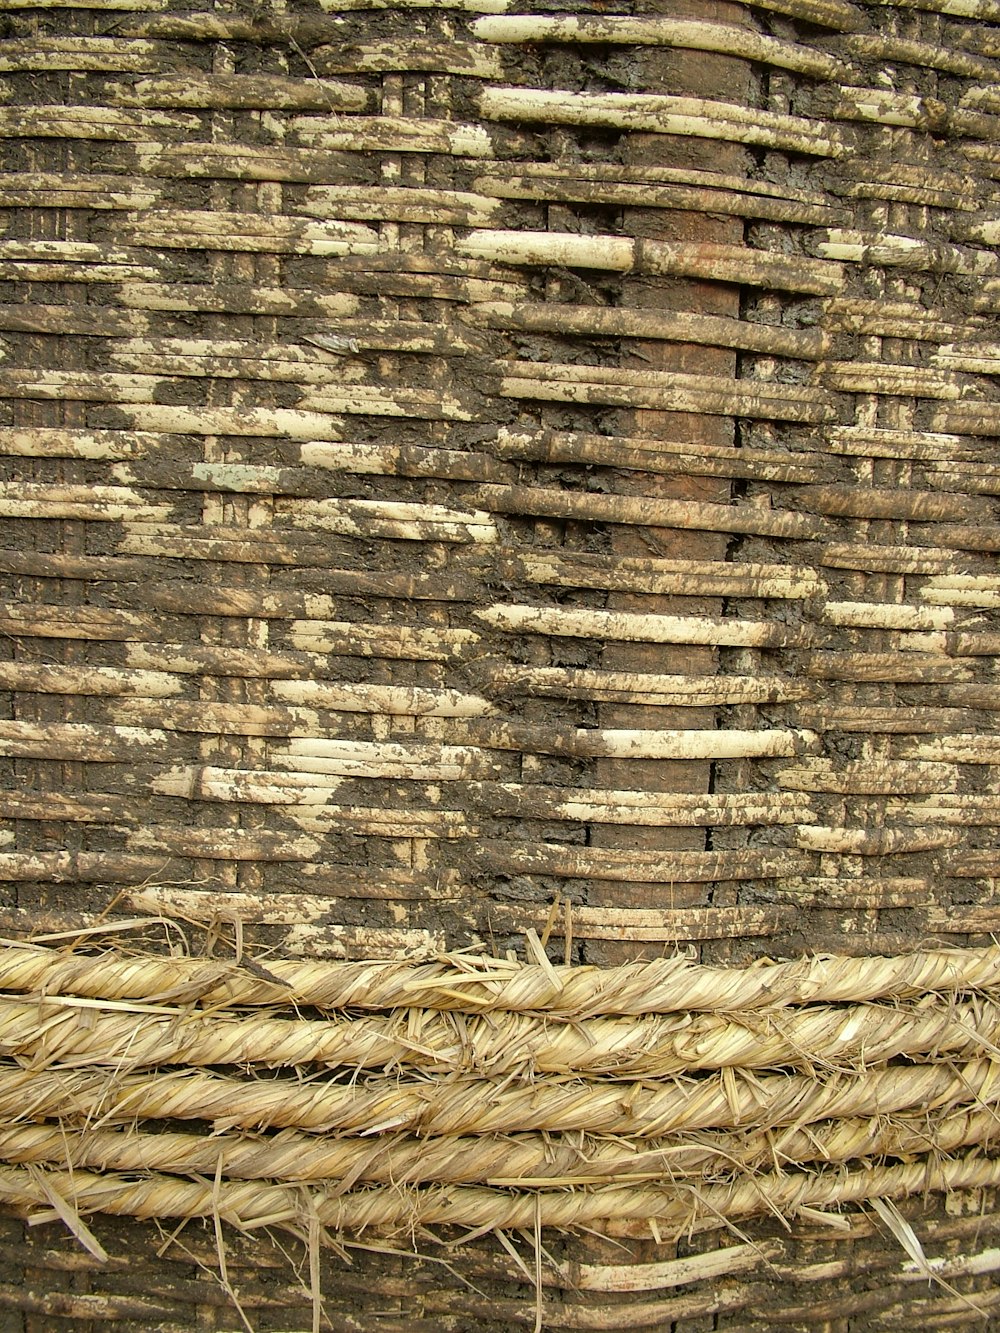 a close up of a wall made of straw